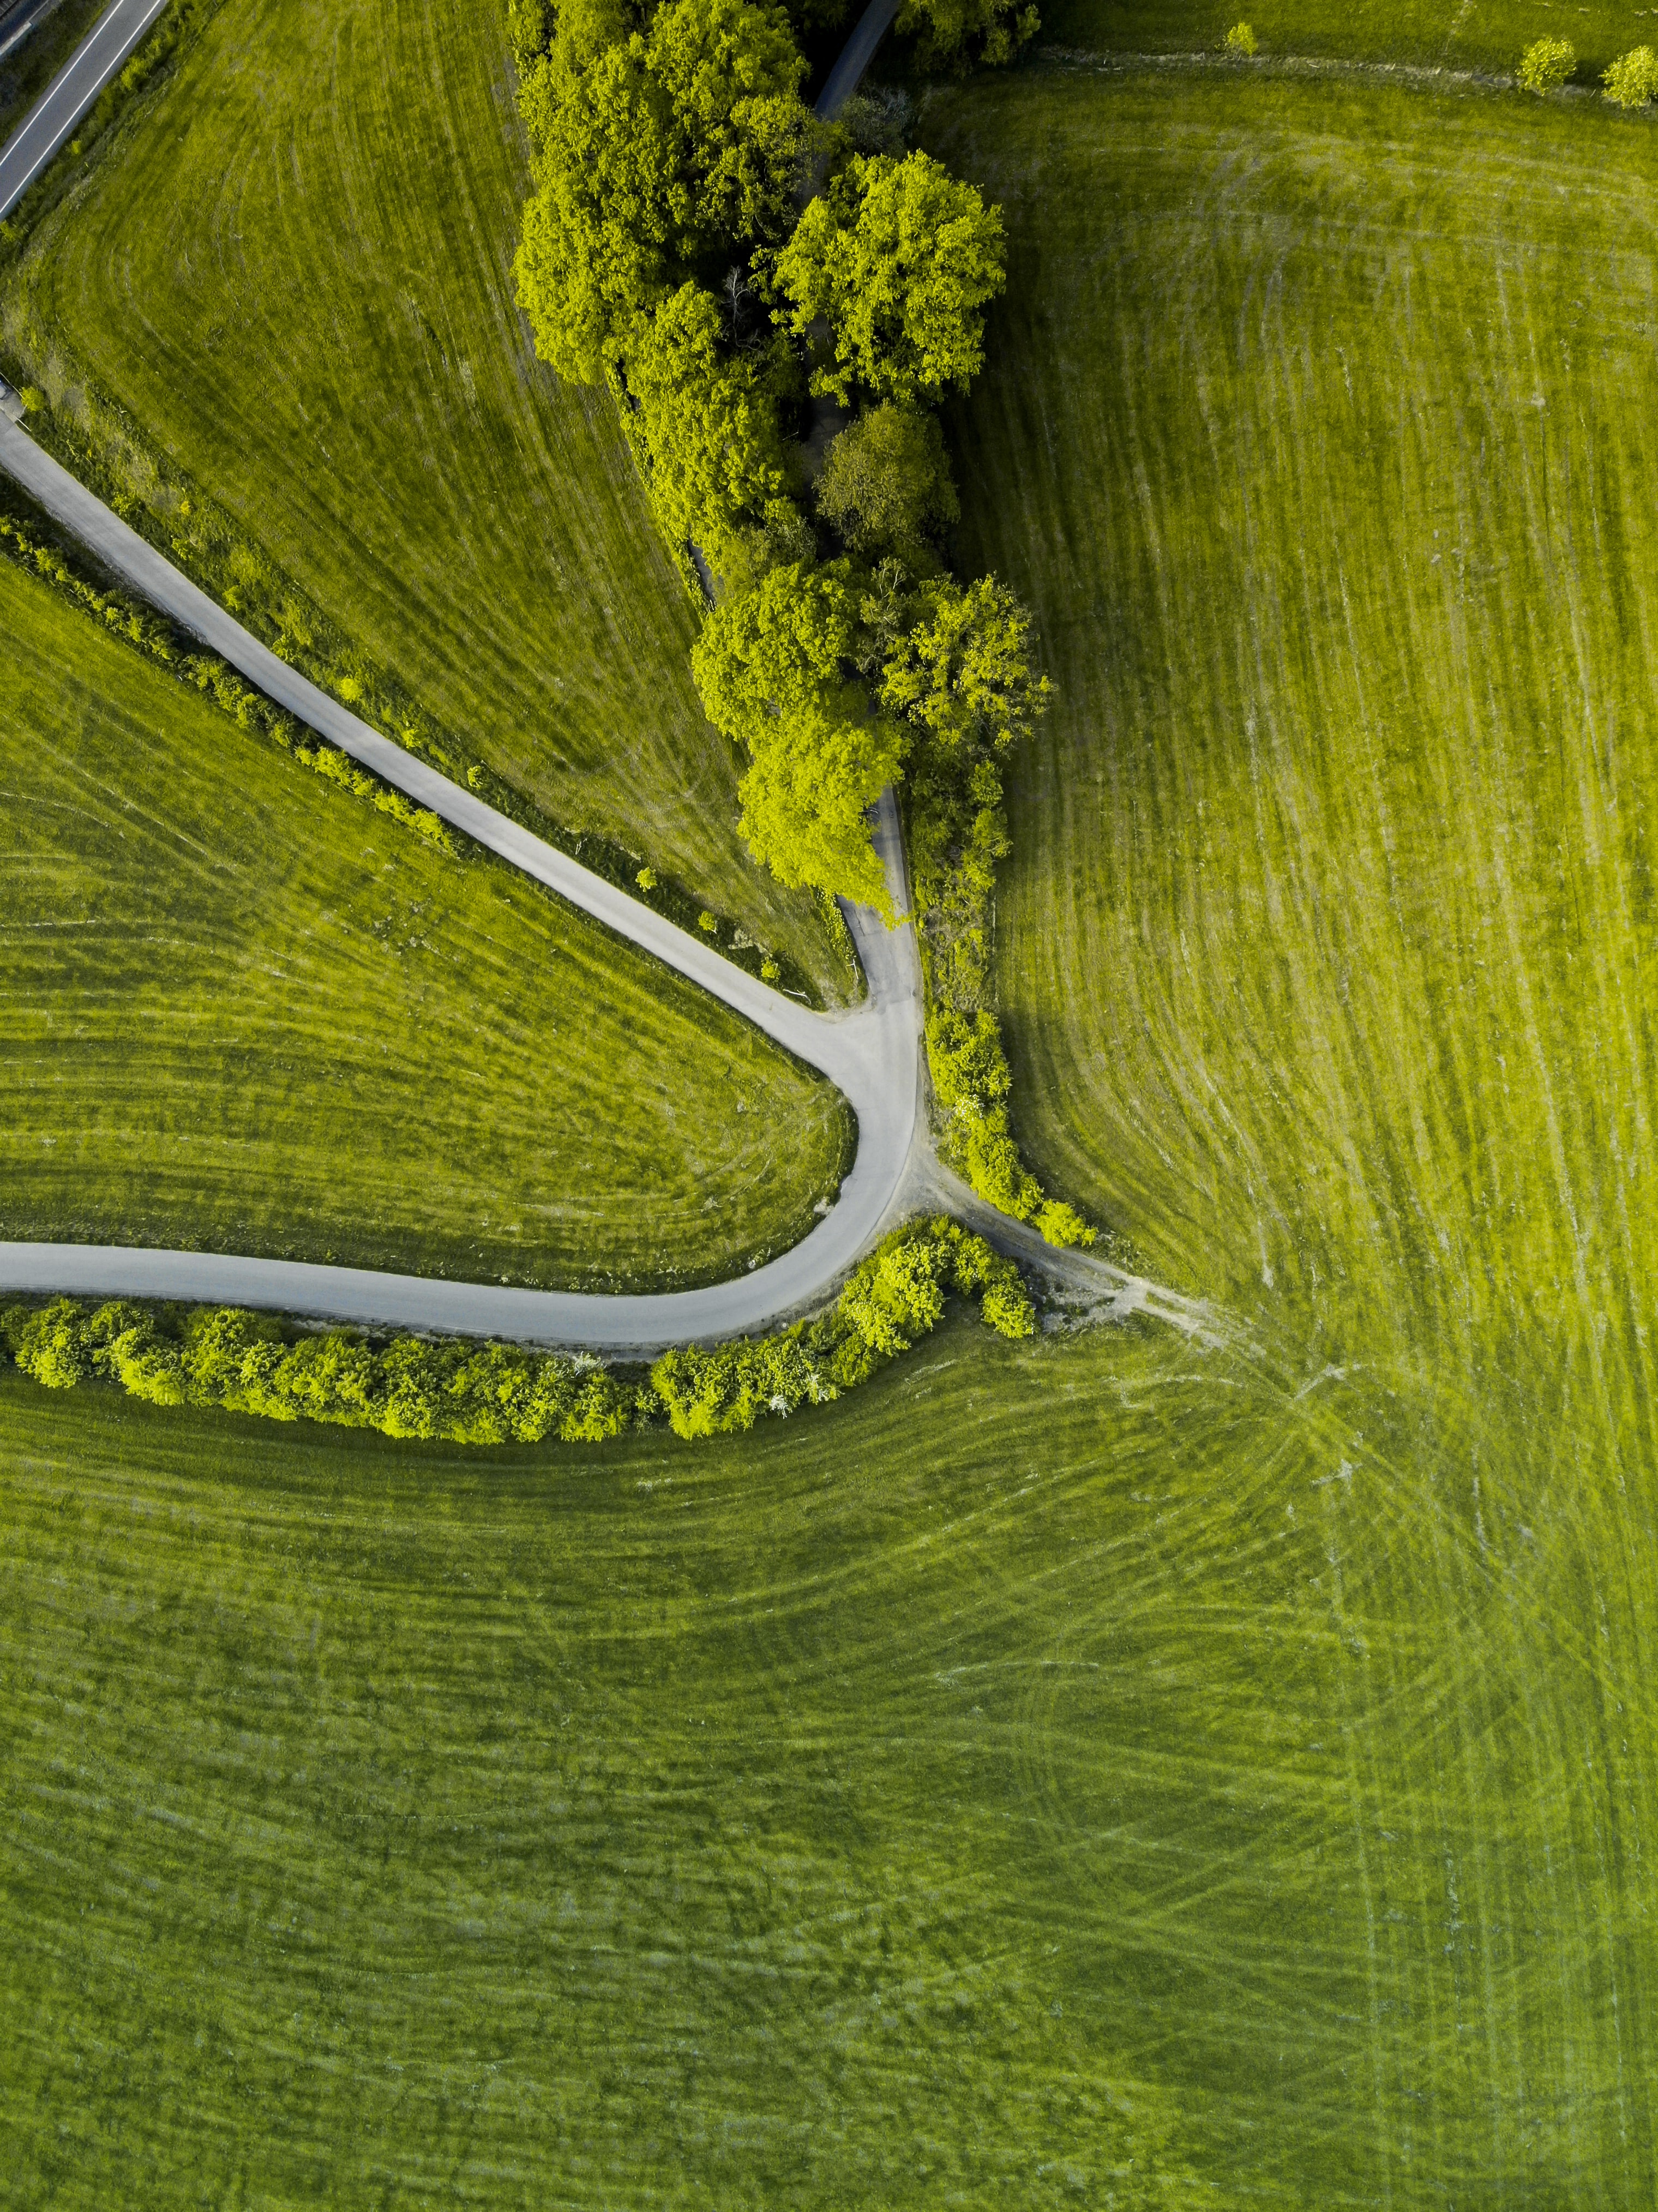 view from above, nature, trees, grass, road, winding, sinuous Full HD